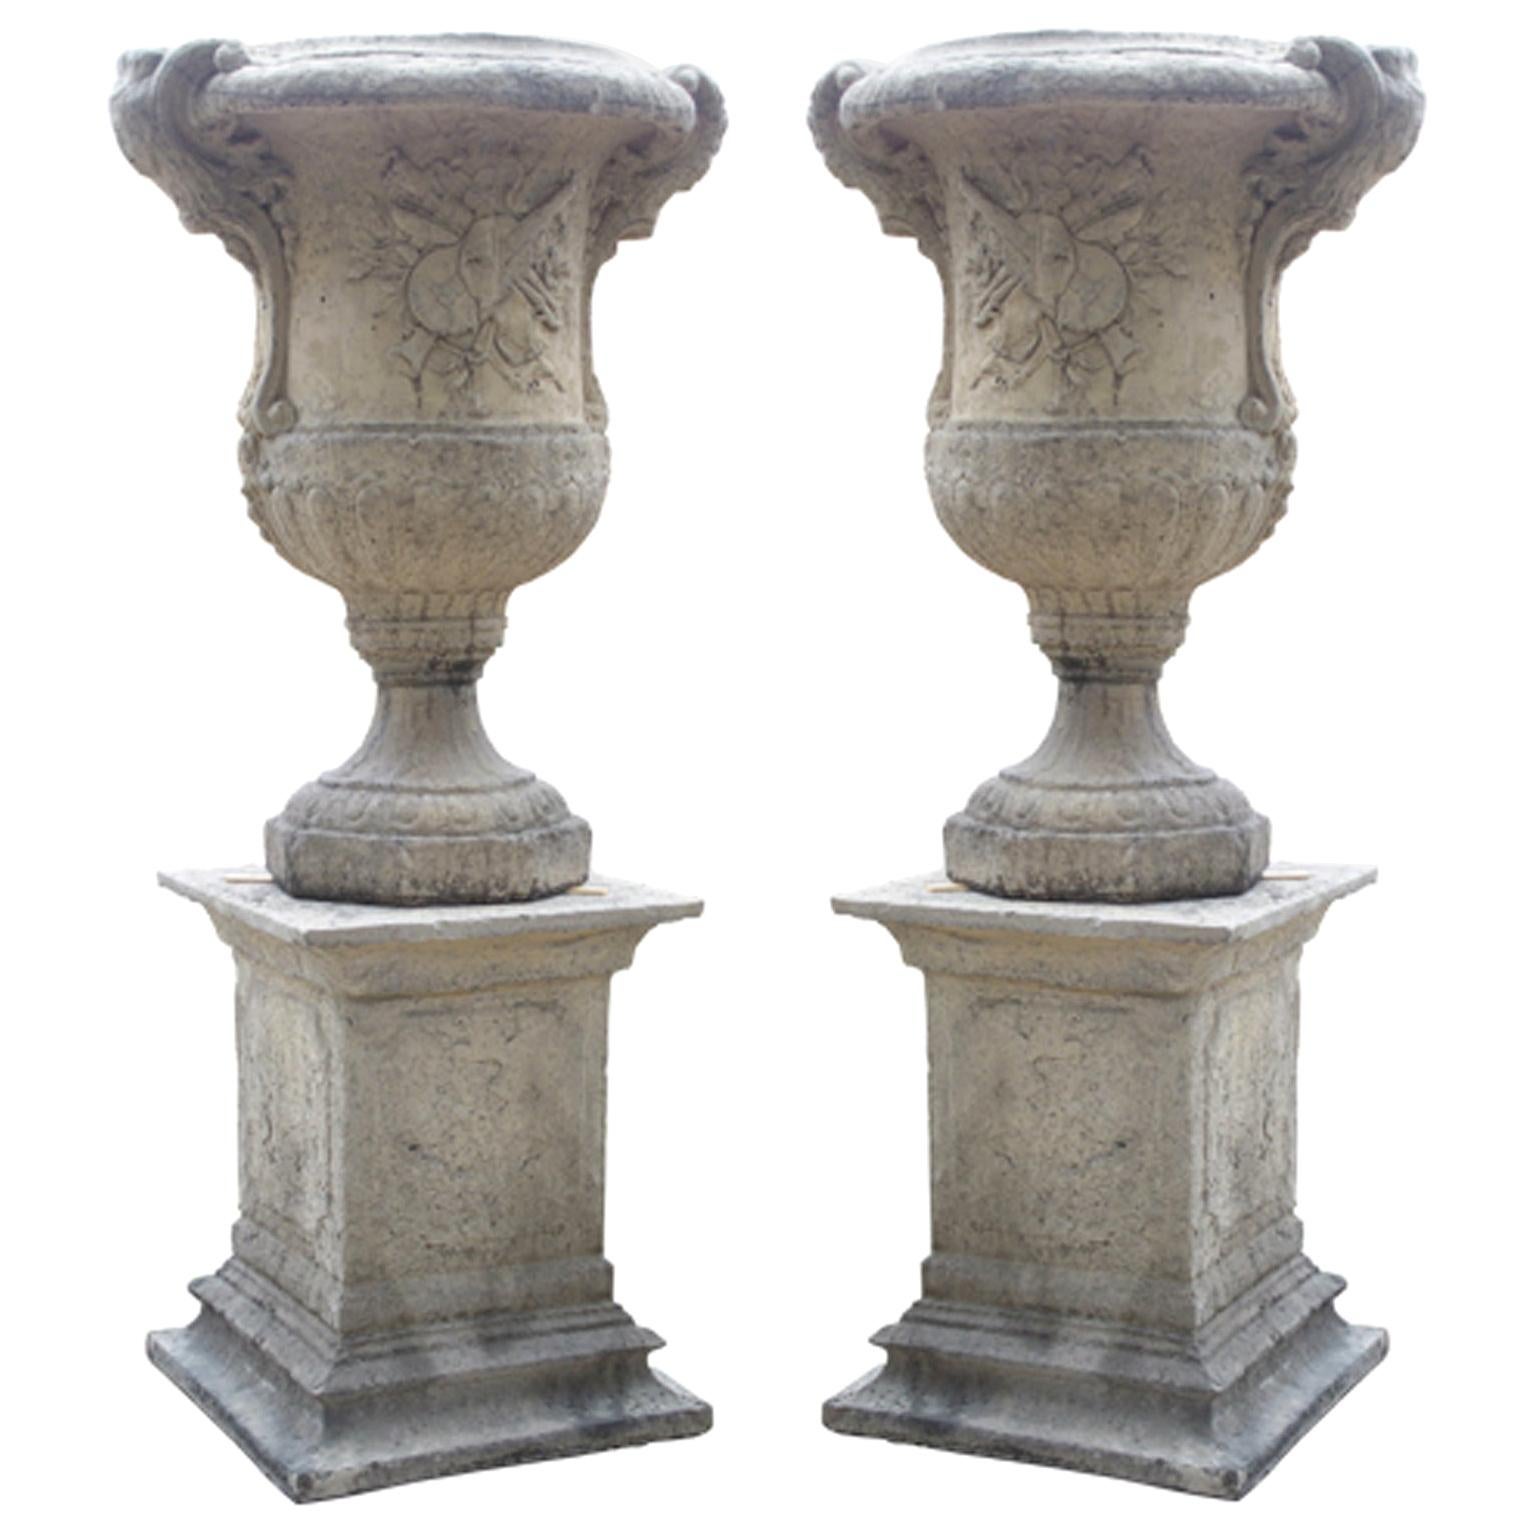 Pair of Cast Stone Musical Trophy Vases on Pedestals from France